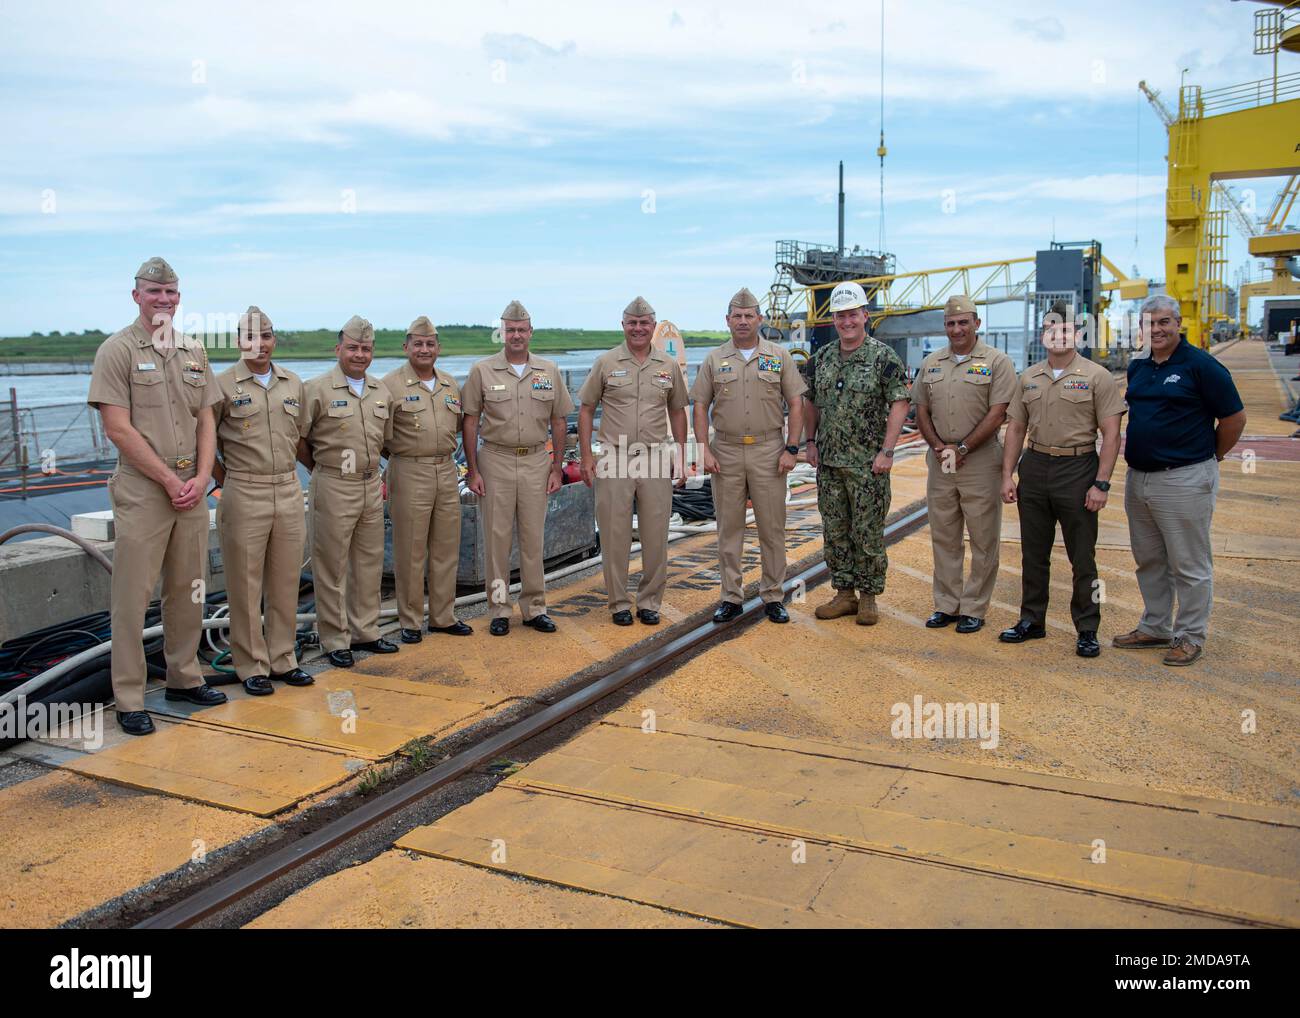 KINGS BAY, Ga. (July 14, 2022) U.S. Navy and partner countries’ Navy submariners pose for a photo in front of the Ohio-class ballistic-missile submarine USS Alaska (SSBN 732) homeported at Naval Submarine Base Kings Bay, Georgia. The visit is part of the Diesel Electric Submarine Initiative (DESI) between the United States and partner nations. DESI is a program designed to train crews and test capabilities in Anti-Submarine Warfare between nuclear-powered and diesel-electric submarines. Stock Photo